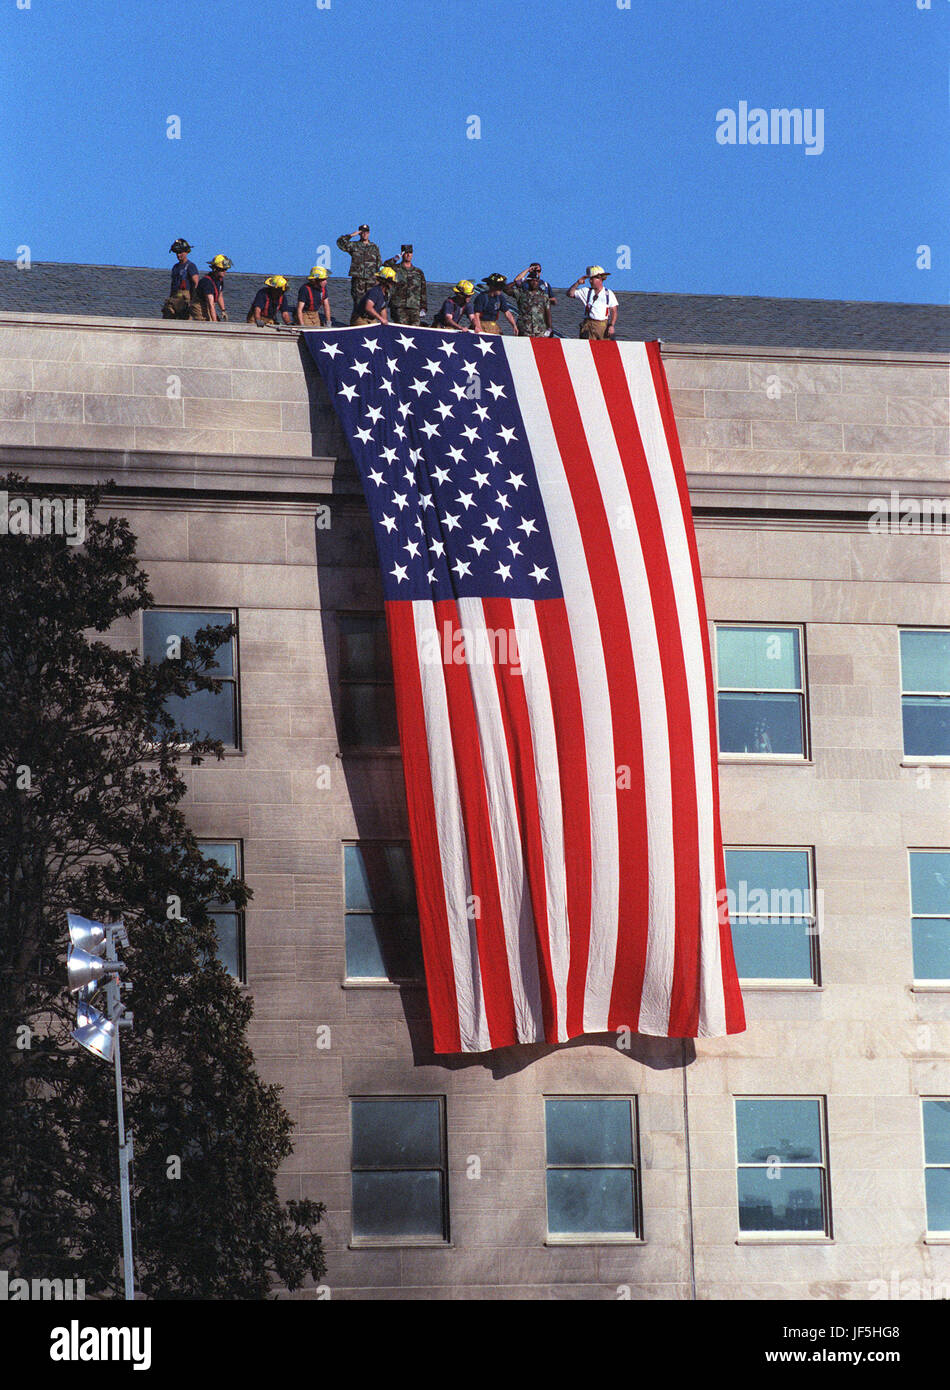 010912-D-9880W-085 Fire fighters and military personnel on the roof of the Pentagon unfurl a large American Flag during the Sept. 12, 2001, visit of President George W. Bush to the site of the previous dayÕs terrorist attack on the Pentagon.  As the flag was draped over the wall, just south of the site where American Airlines Flight 77 impacted the building, the disaster workers gathered around the President began to sing God Bless America.  DoD photo by R. D. Ward. Stock Photo